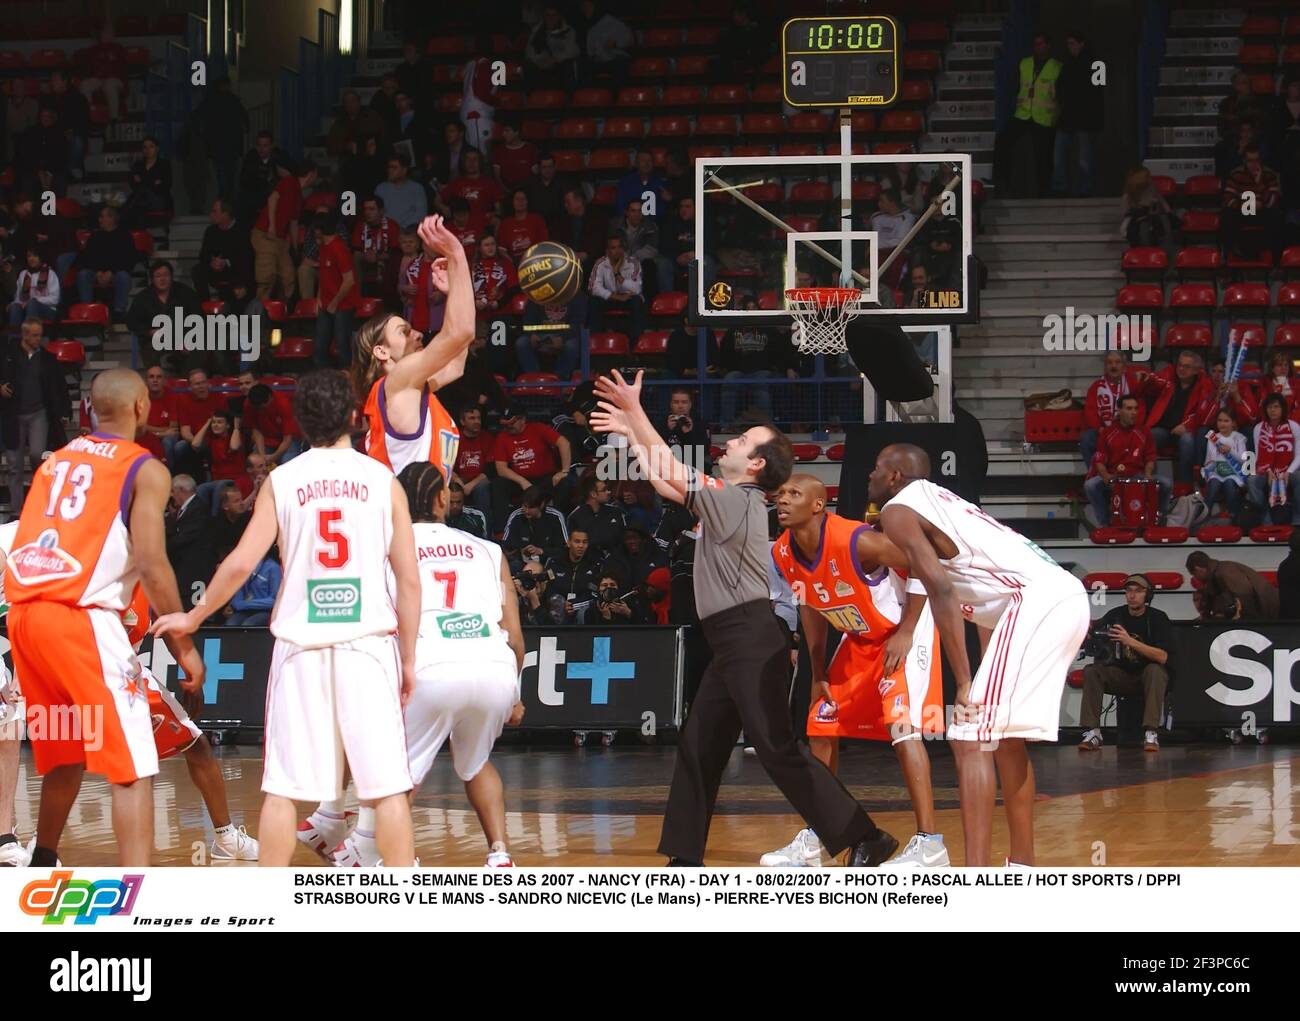 BASKET BALL - SEMAINE DES AS 2007 - NANCY (FRA) - DAY 1 - 08/02/2007 -  PHOTO : PASCAL ALLEE / HOT SPORTS / DPPI STRASBOURG V LE MANS - SANDRO  NICEVIC (Le Mans) - PIERRE-YVES BICHON (Referee Stock Photo - Alamy